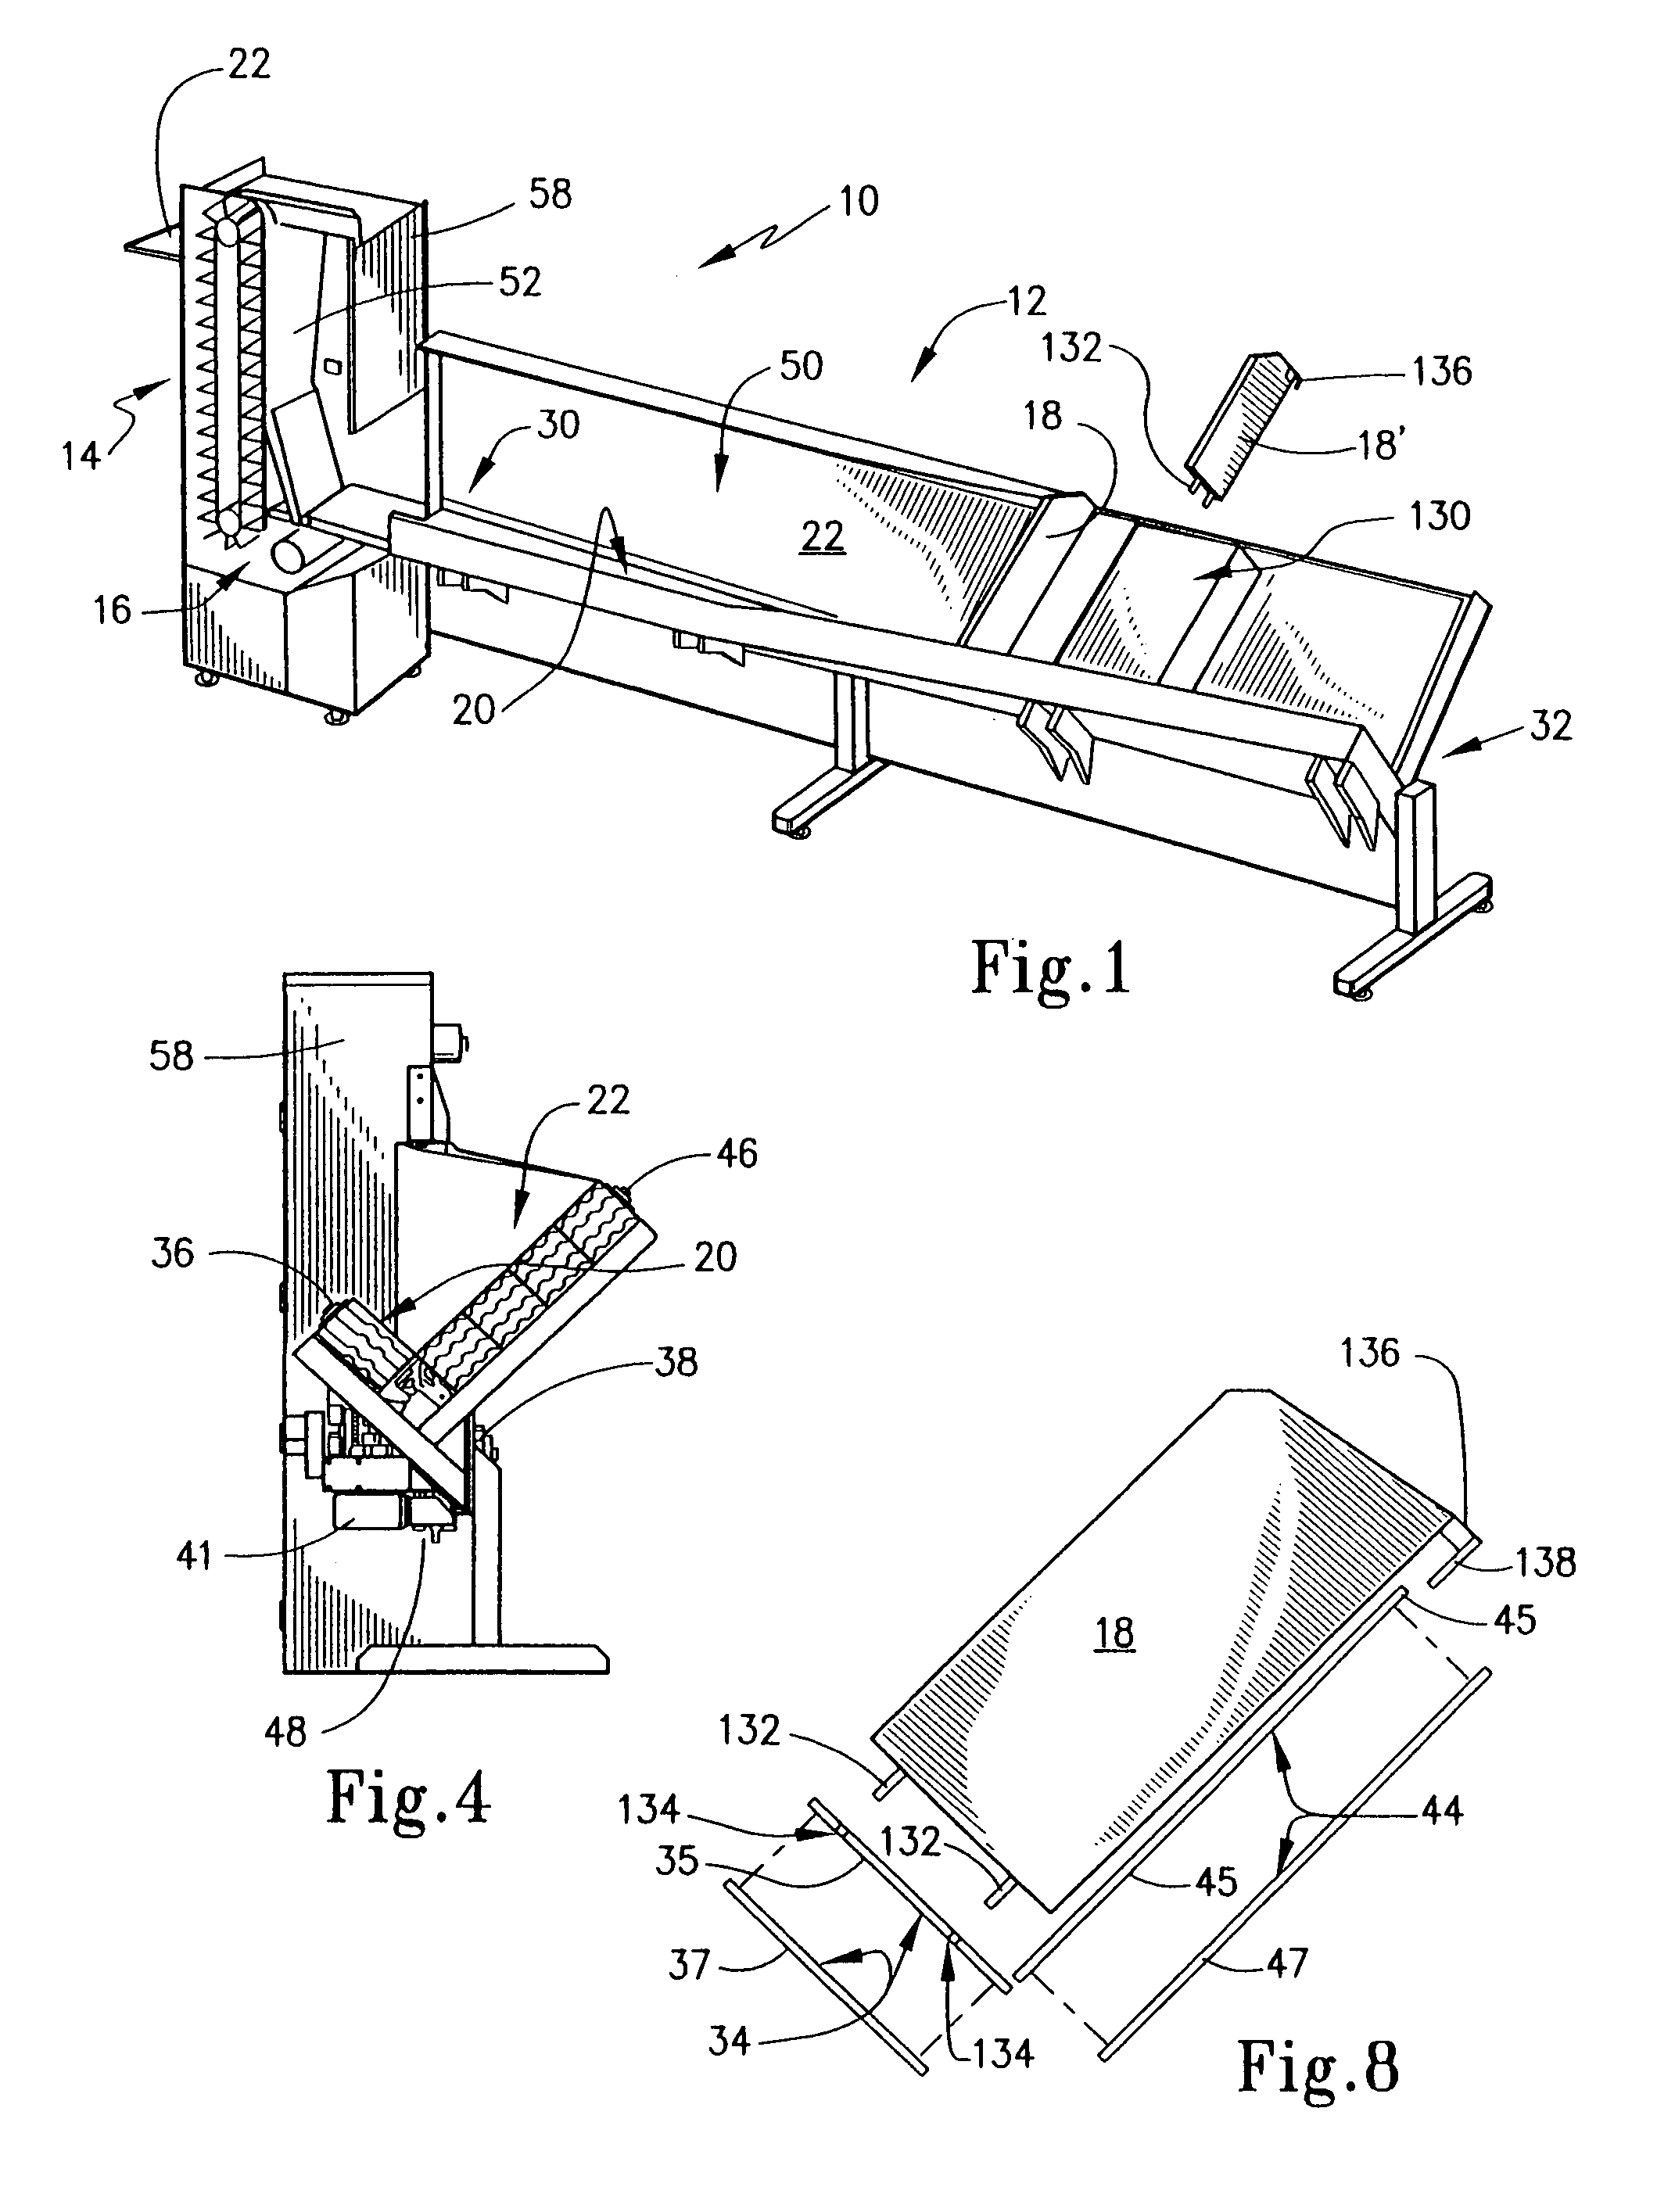 Container transport and organizing apparatus for use in manufacturing operations and method thereof